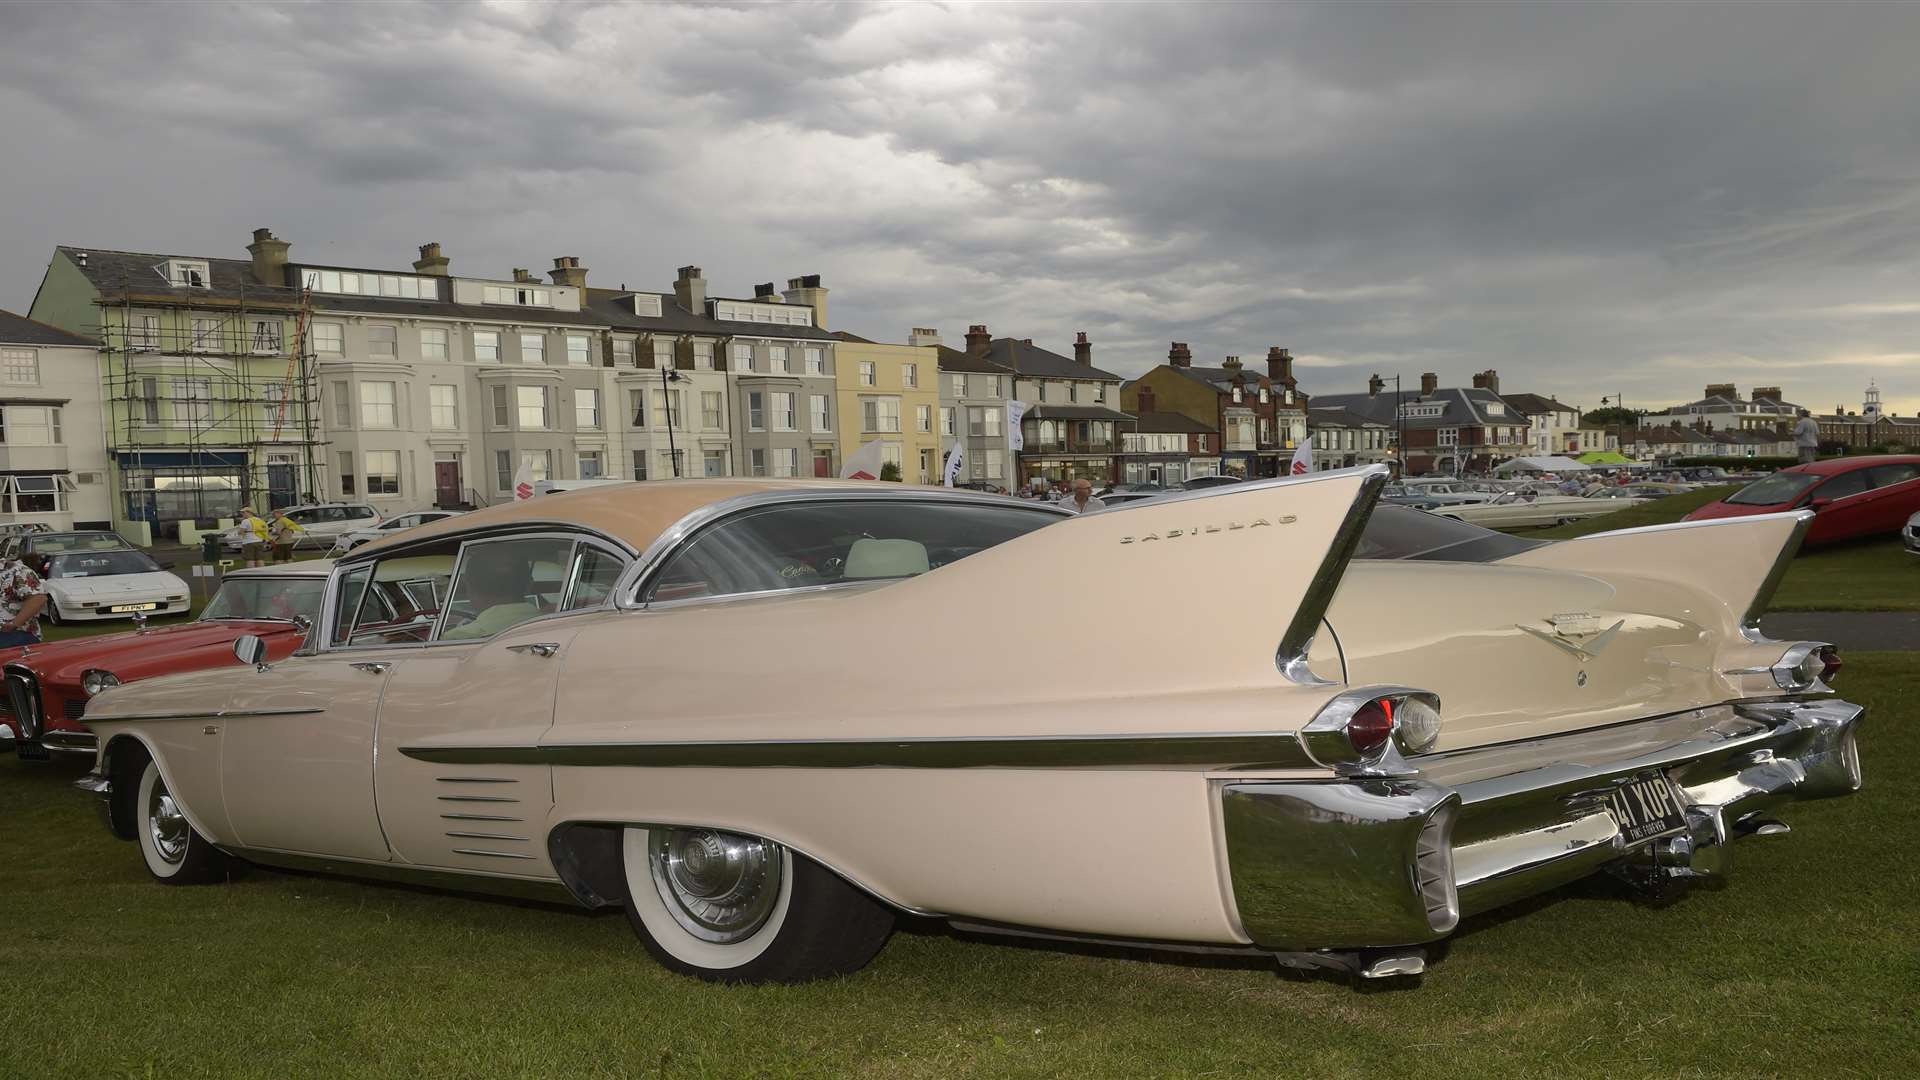 More than 800 cars exhibited at Deal Classic Motor Show